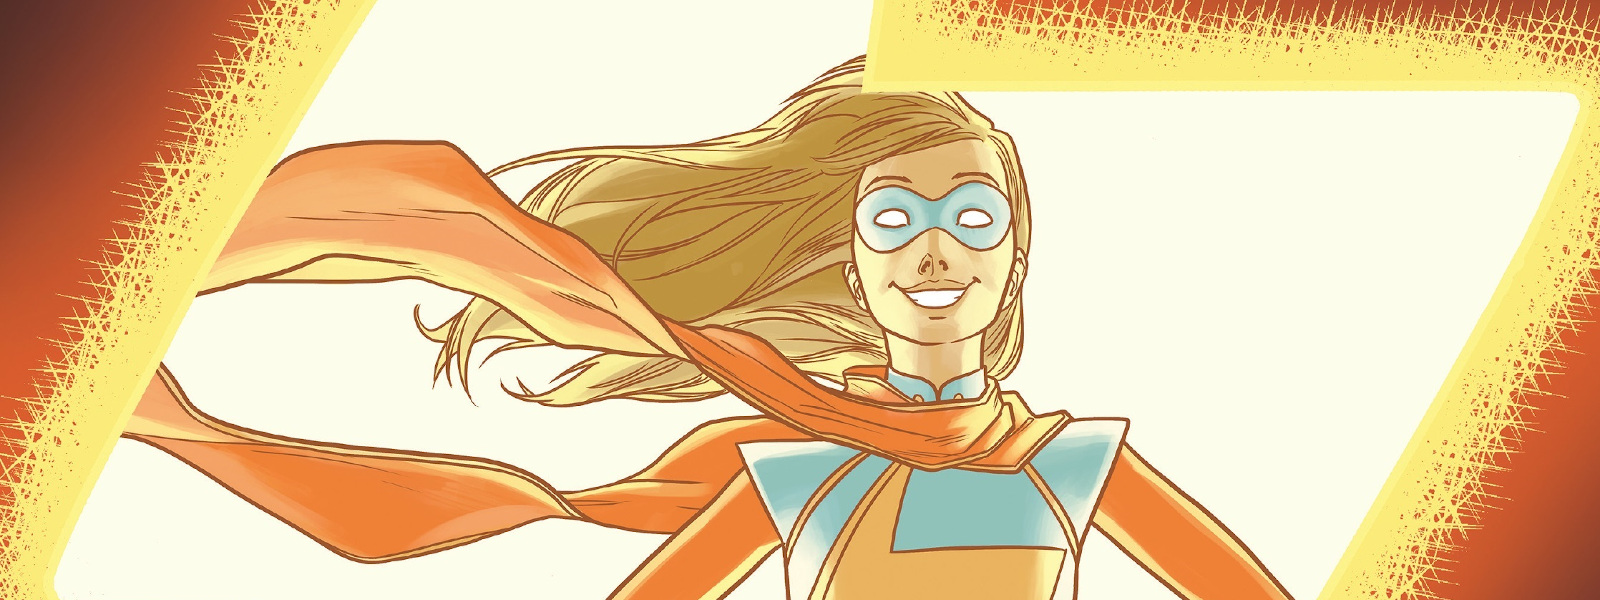 Ms. Marvel Vol 2. by G. Willow Wilson